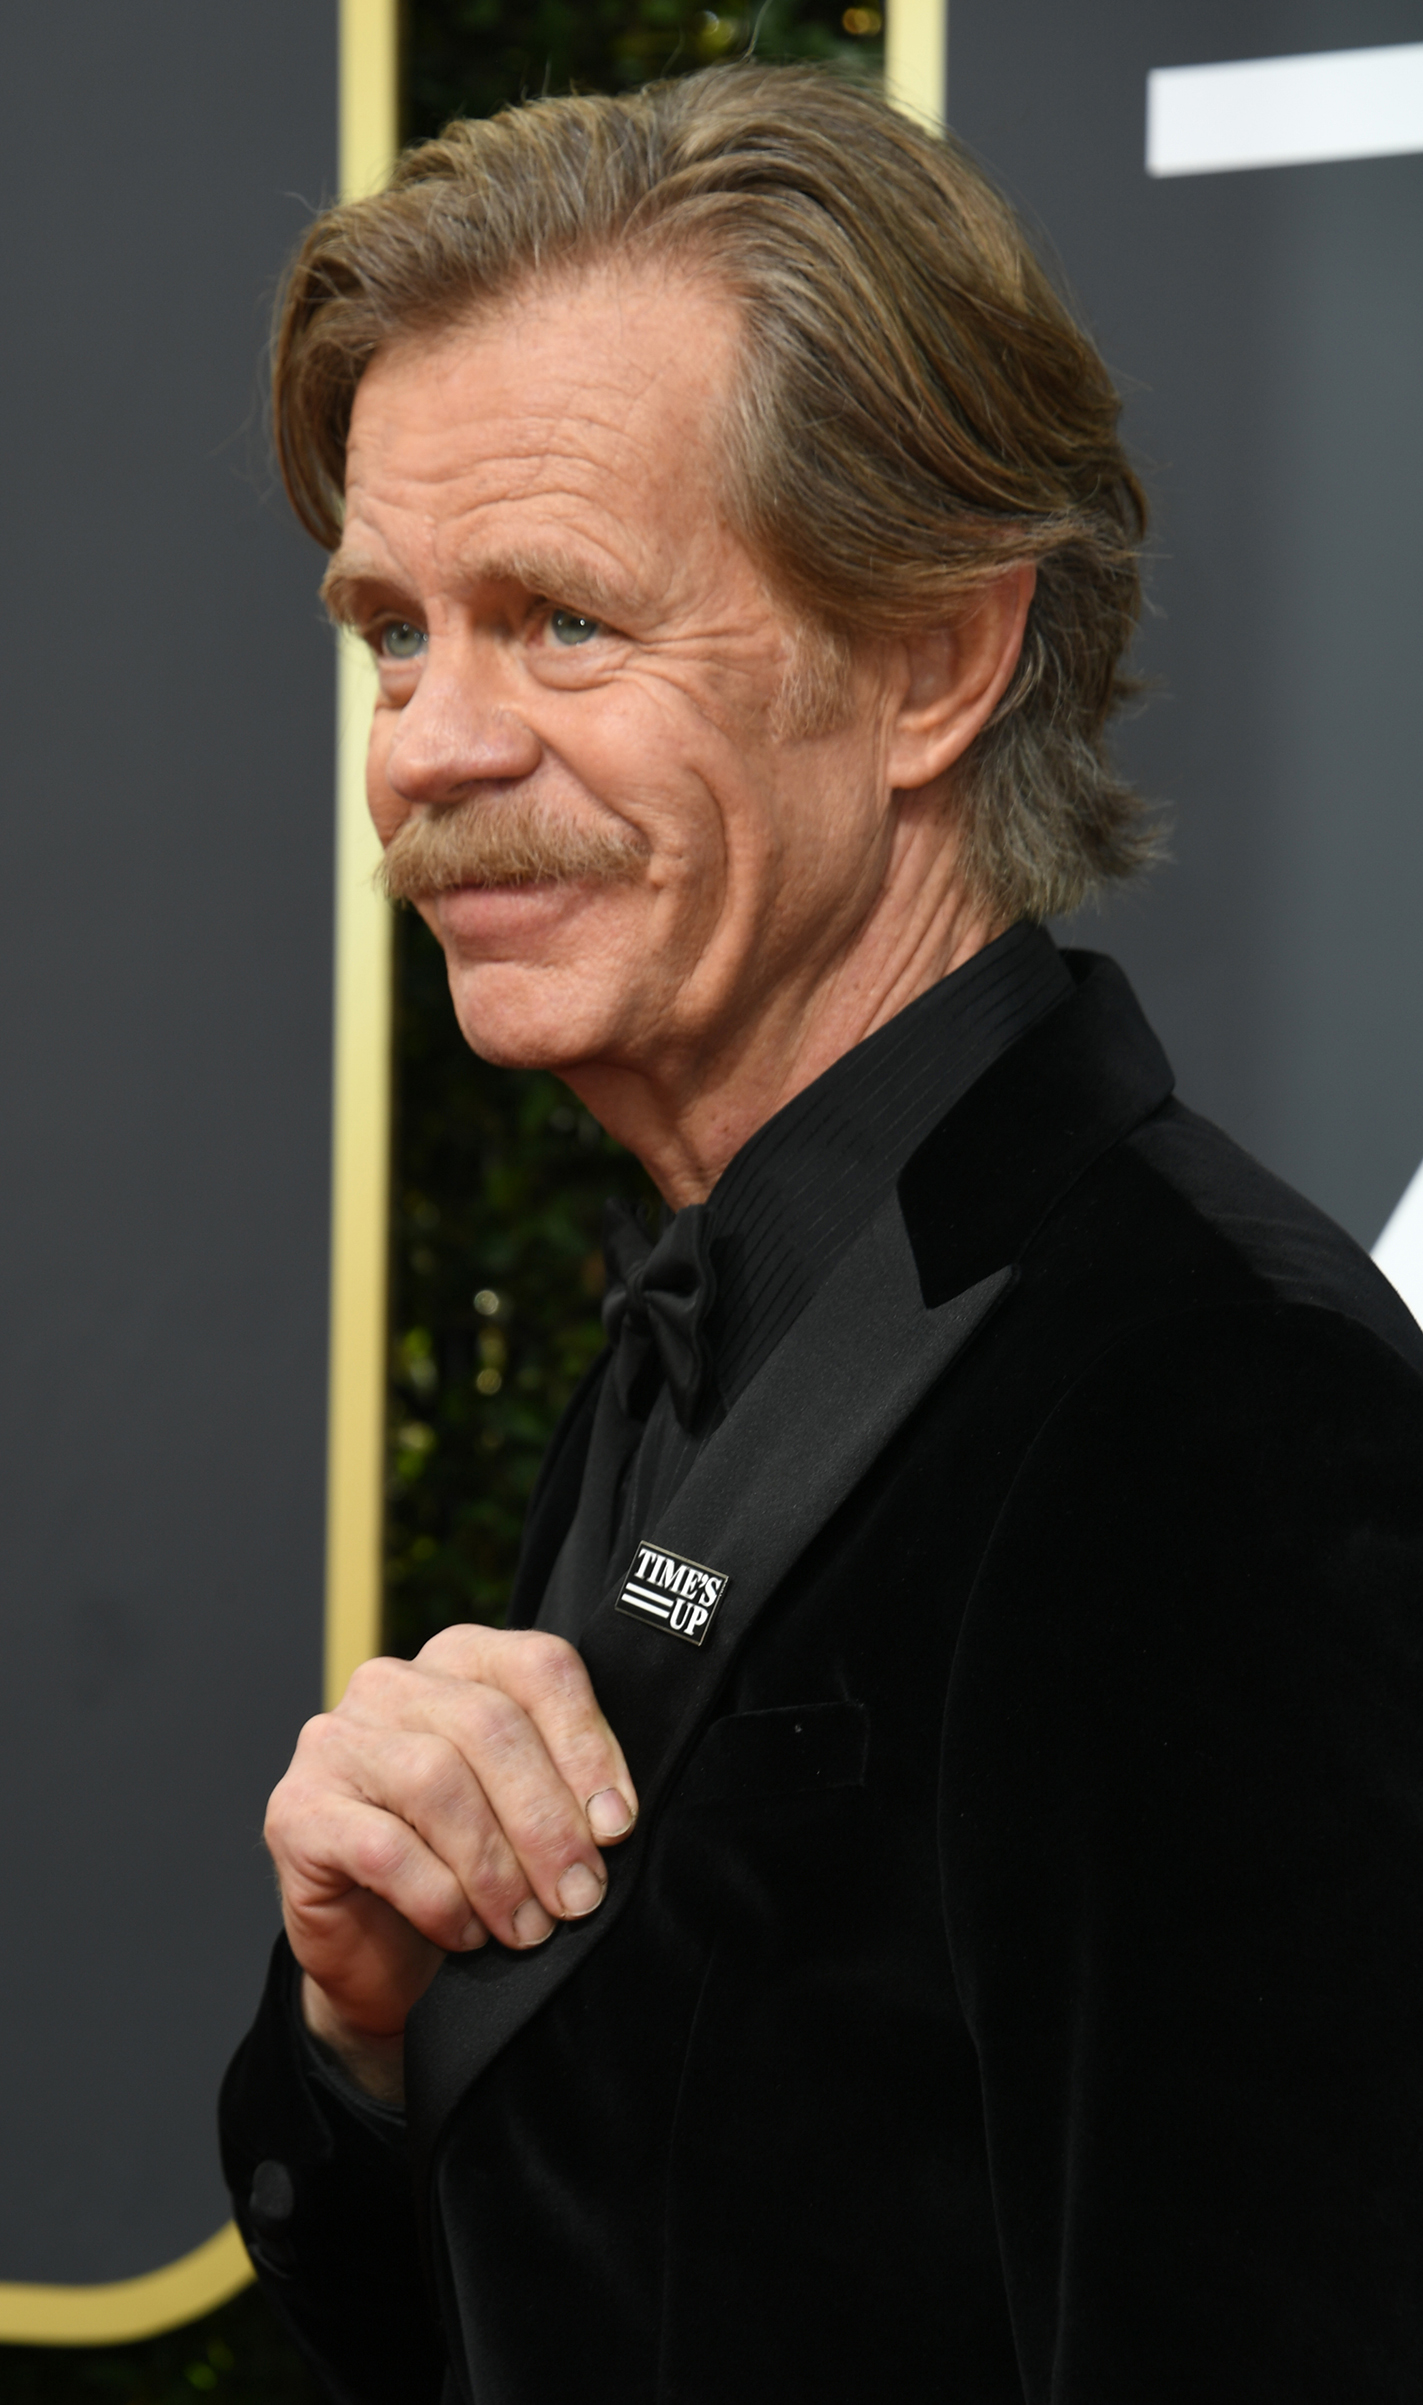 Actor William H. Macy arrives for the 75th Golden Globe Awards on January 7, 2018, in Beverly Hills, California. (Valerie Macon— AFP/Getty Images)